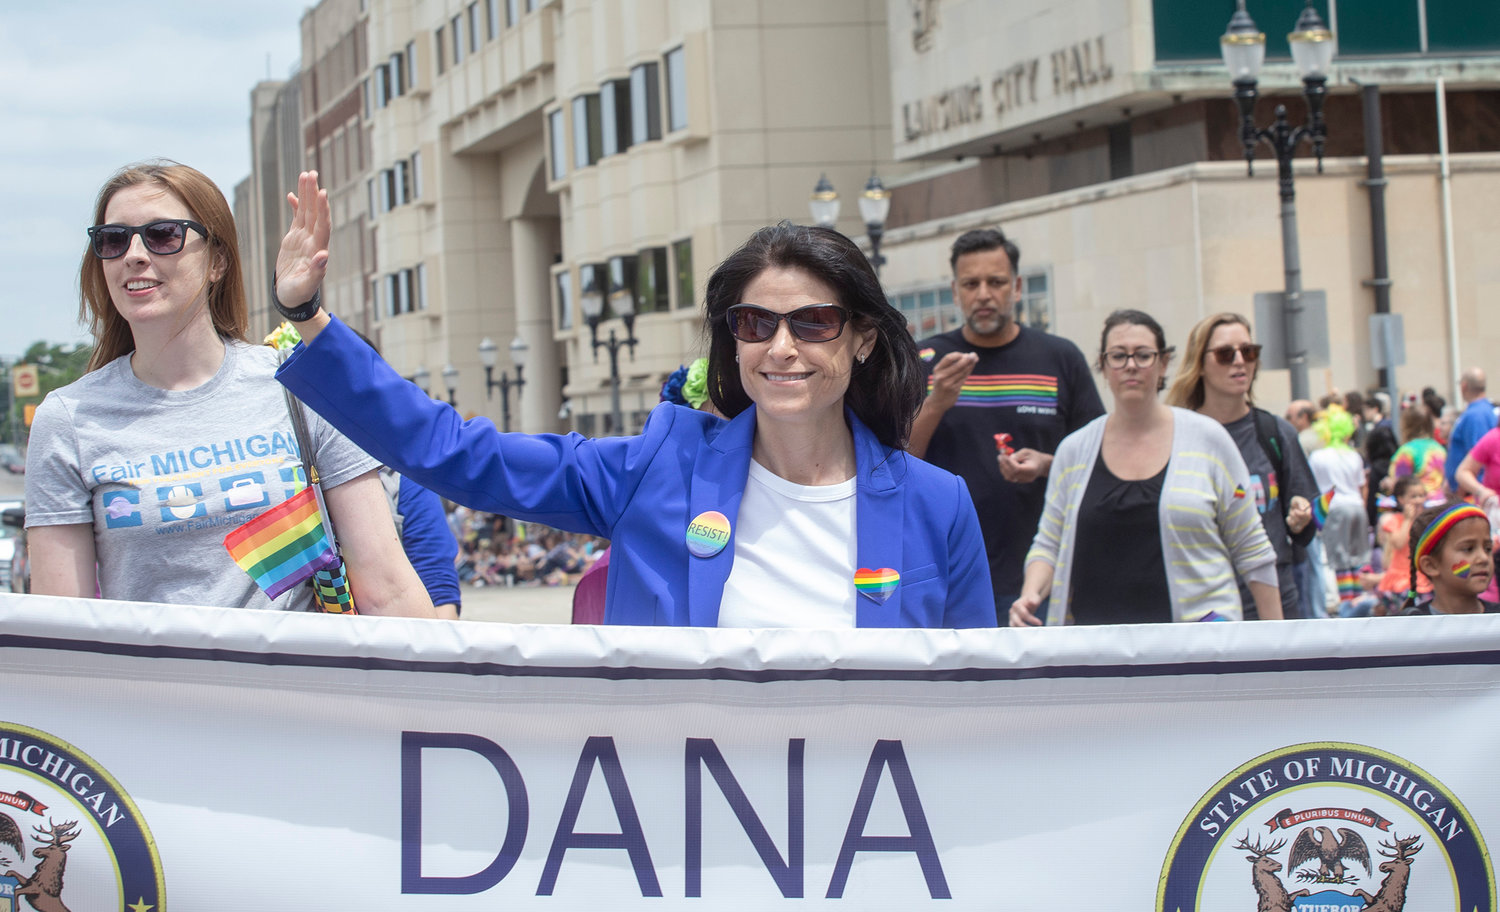 To borrow a phrase, we've come a long way... from 2008 when everyone came to Lansing for MIPRIDE hoisting their cities and regions pink placards to having an out Lesbian Attorney General as Grand Marshal accompanied by churches in the line-up.